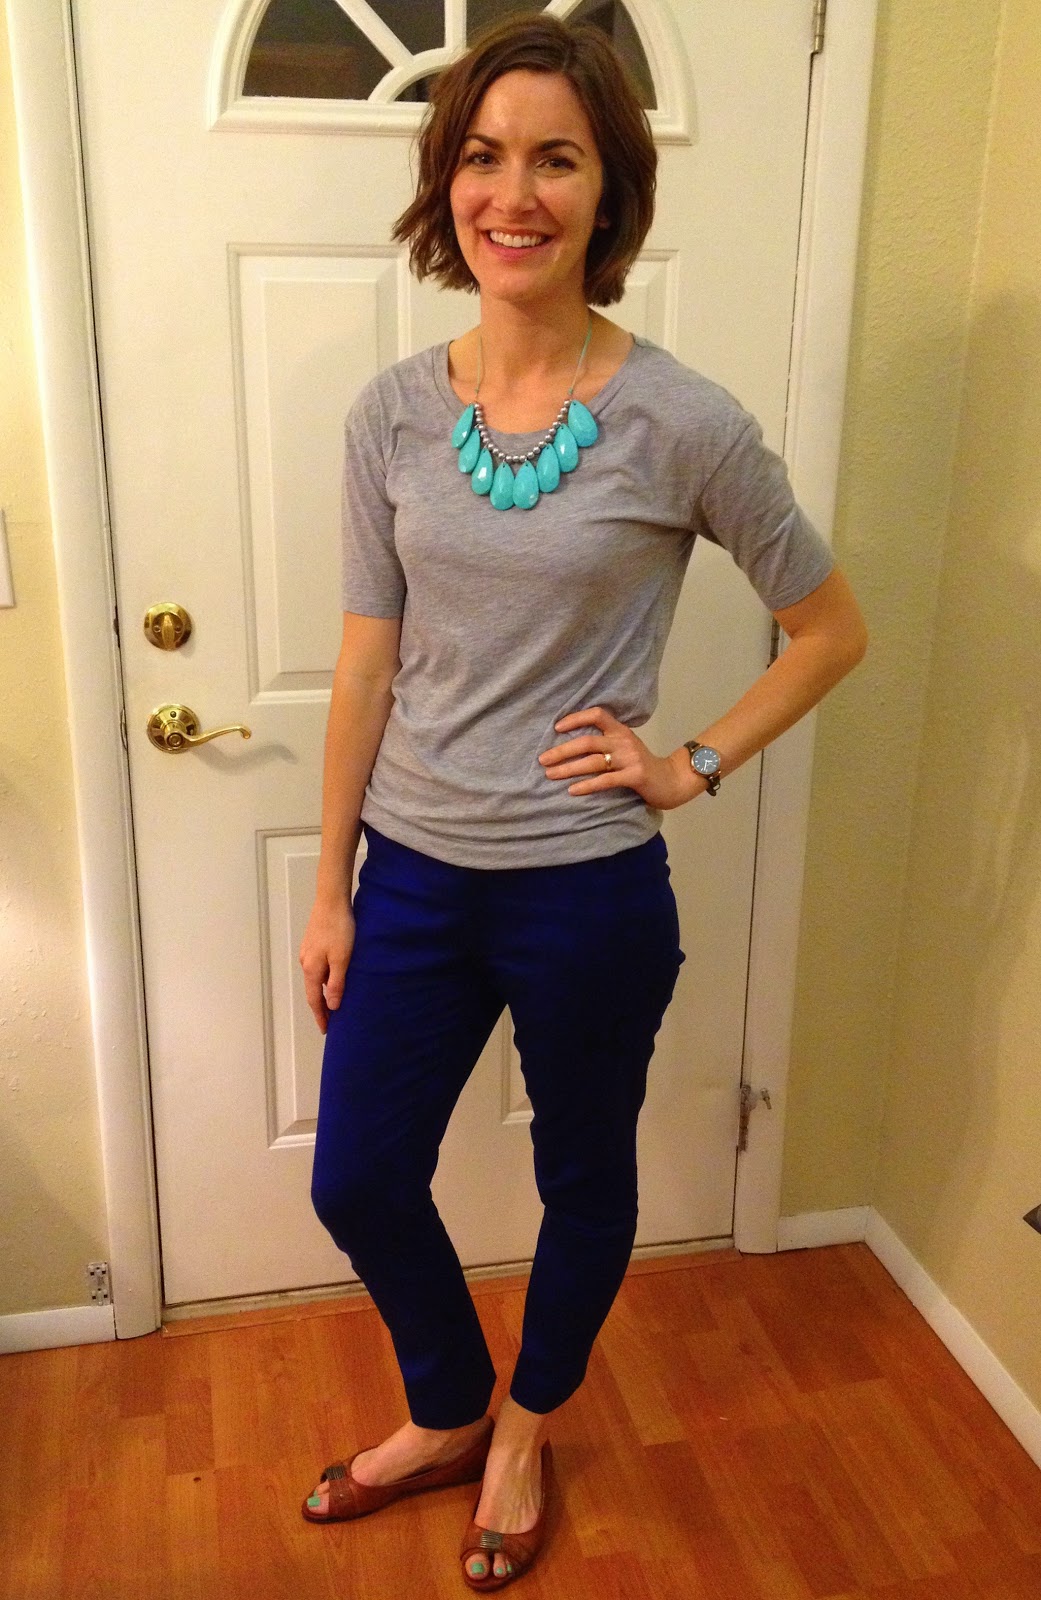 Outfit of the Week - My Take on Colored Pants | The Cream to My Coffee